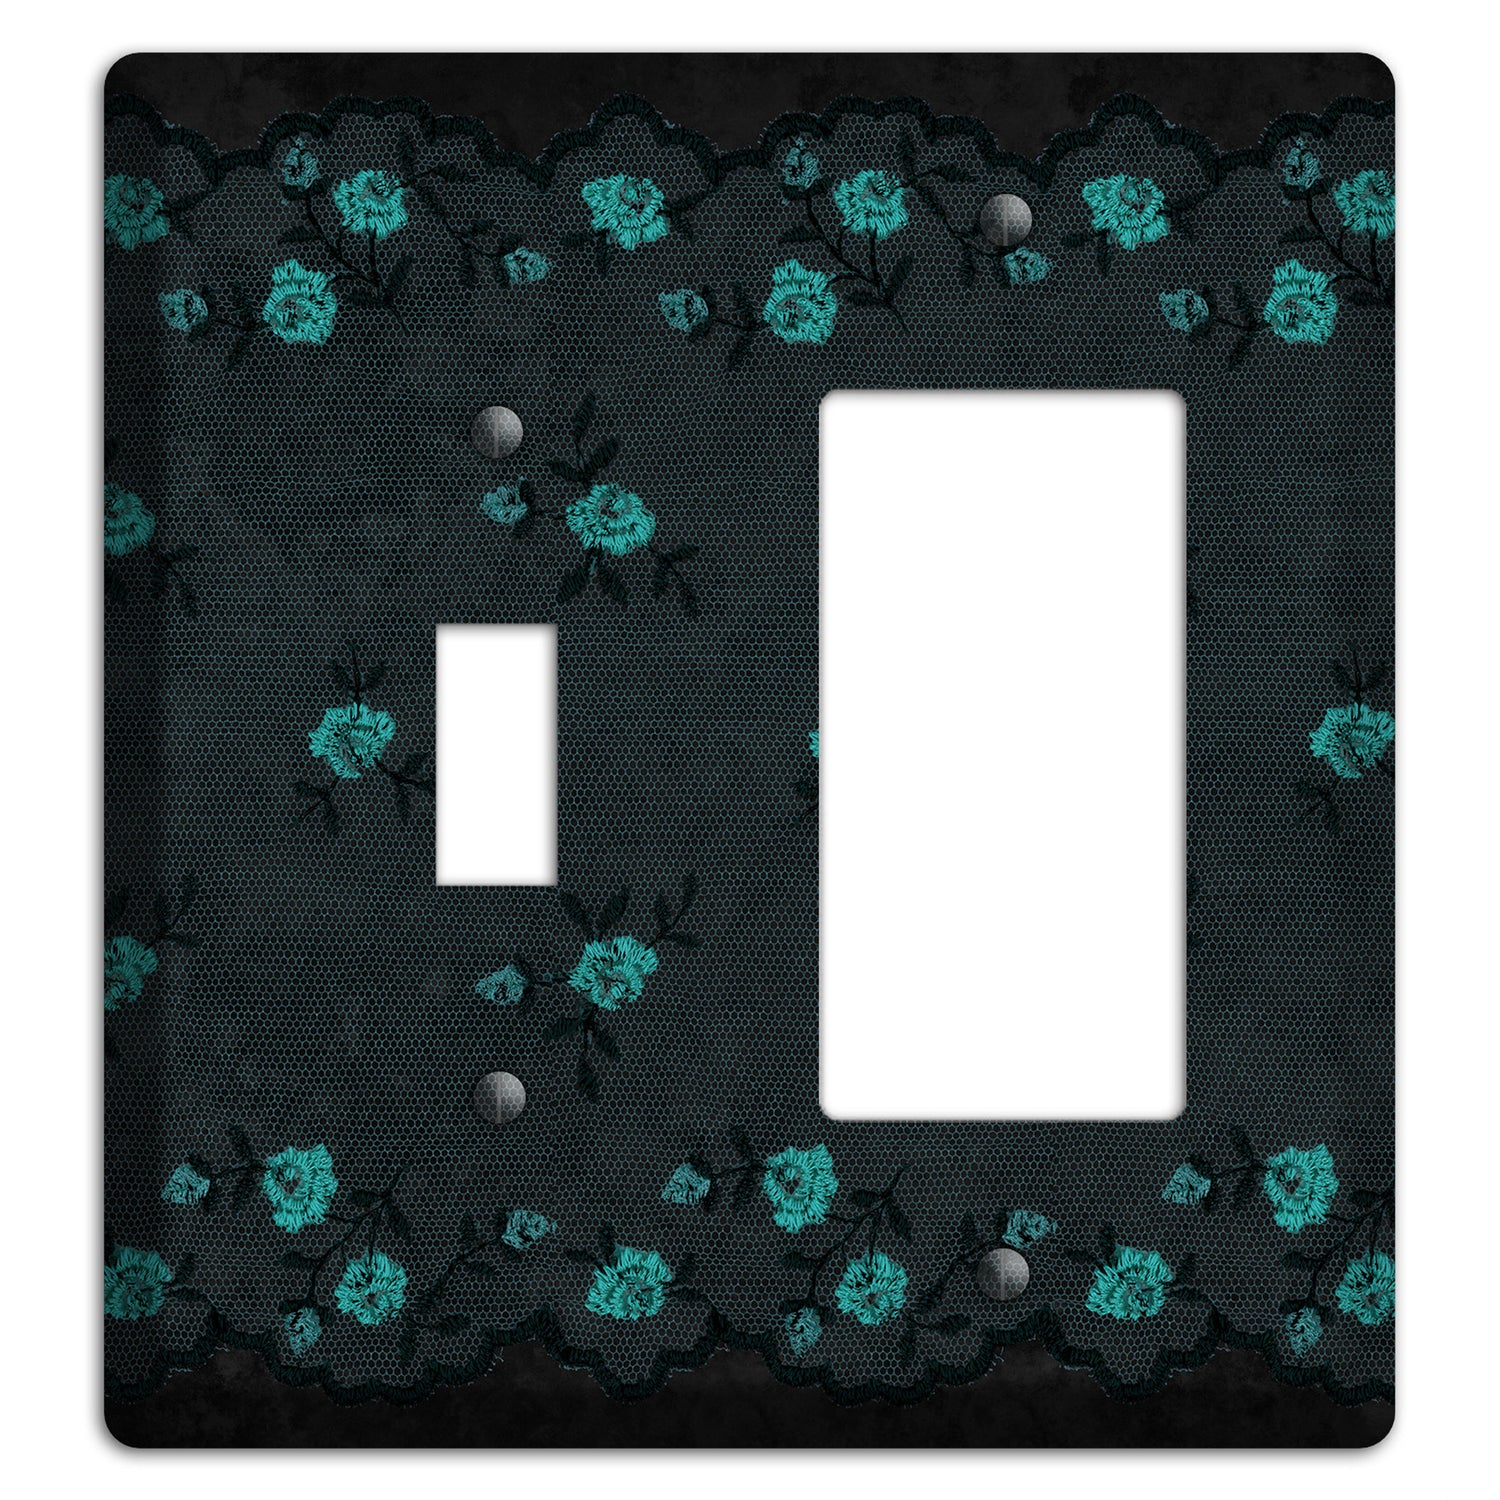 Embroidered Floral Black Toggle / Rocker Wallplate